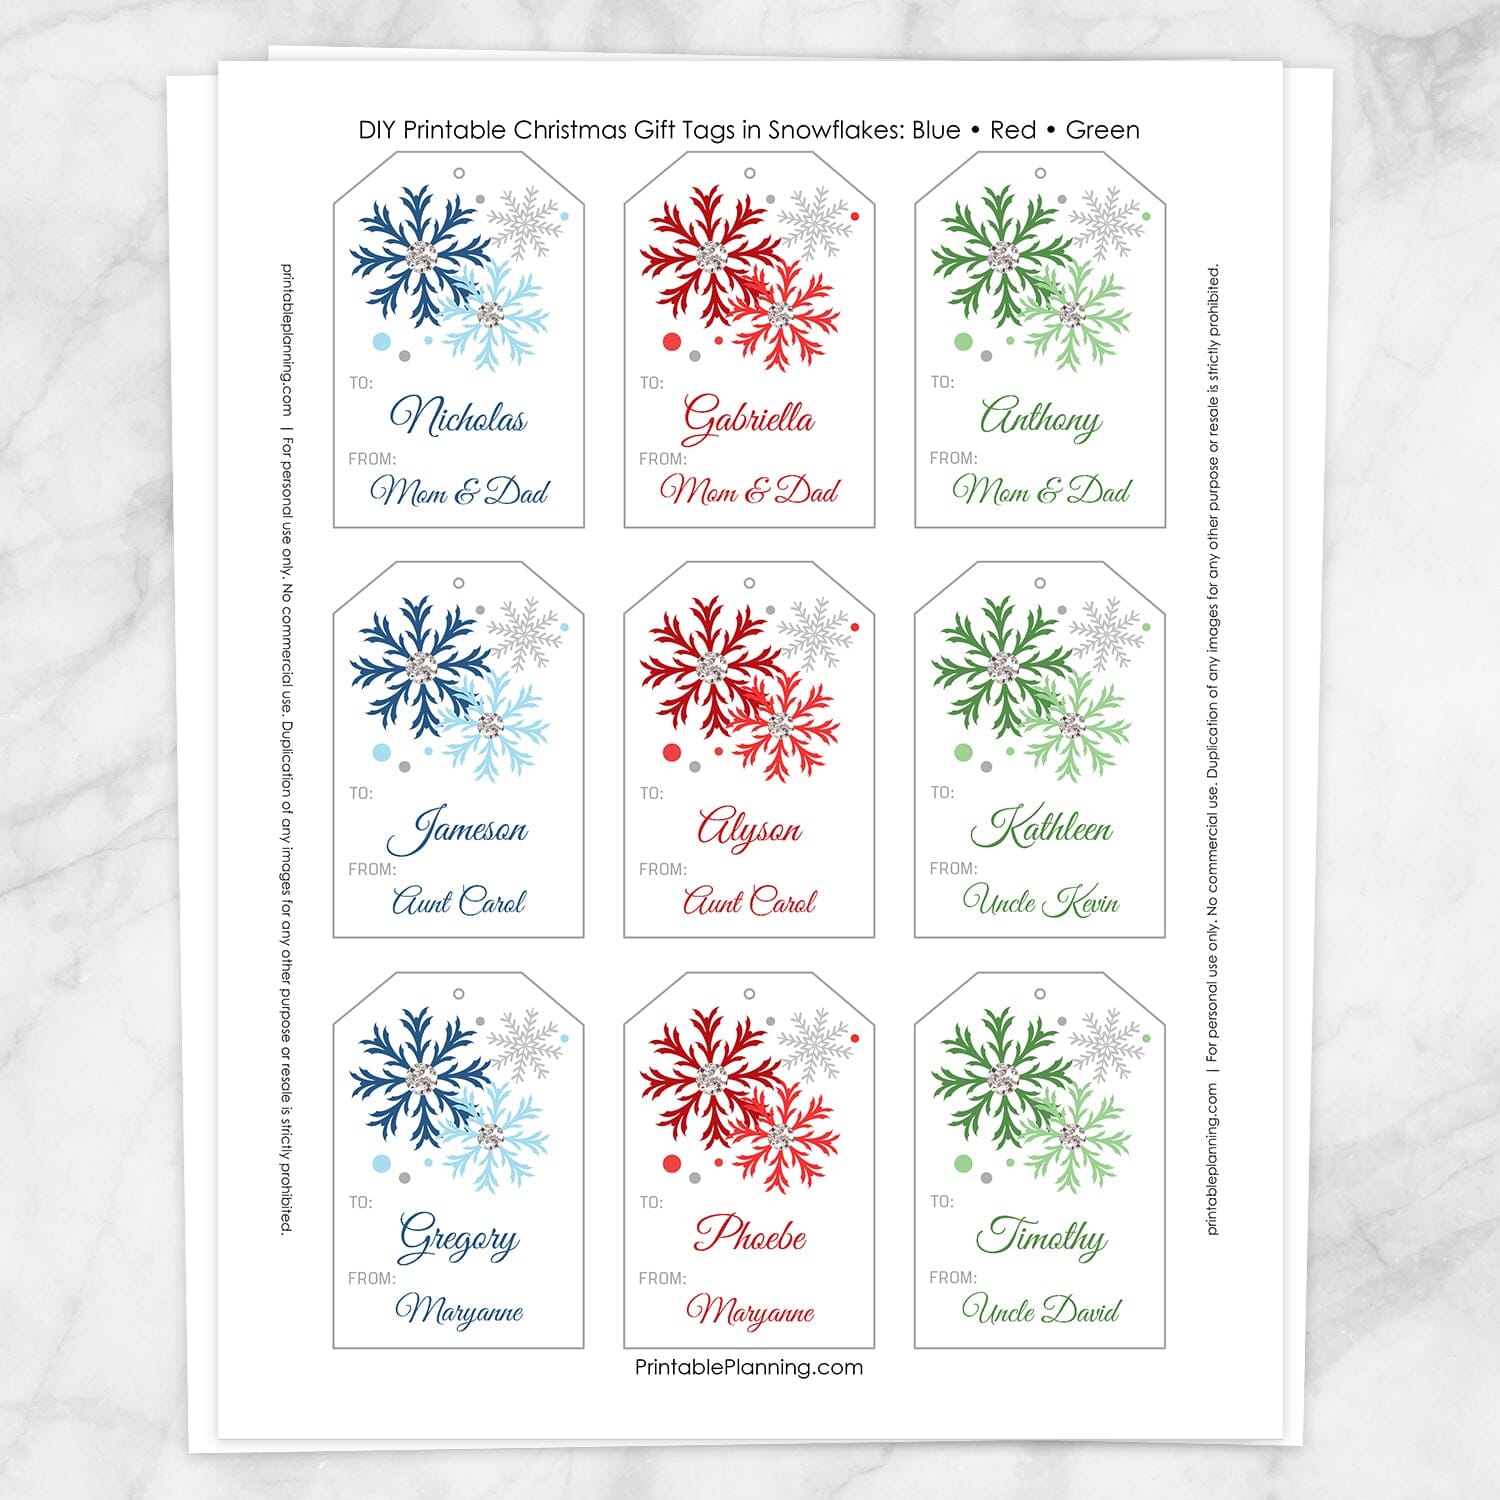 Printable Snowflake Personalized Gift Tags - Blue Red Green at Printable Planning. Sheet of 9 gift tags.